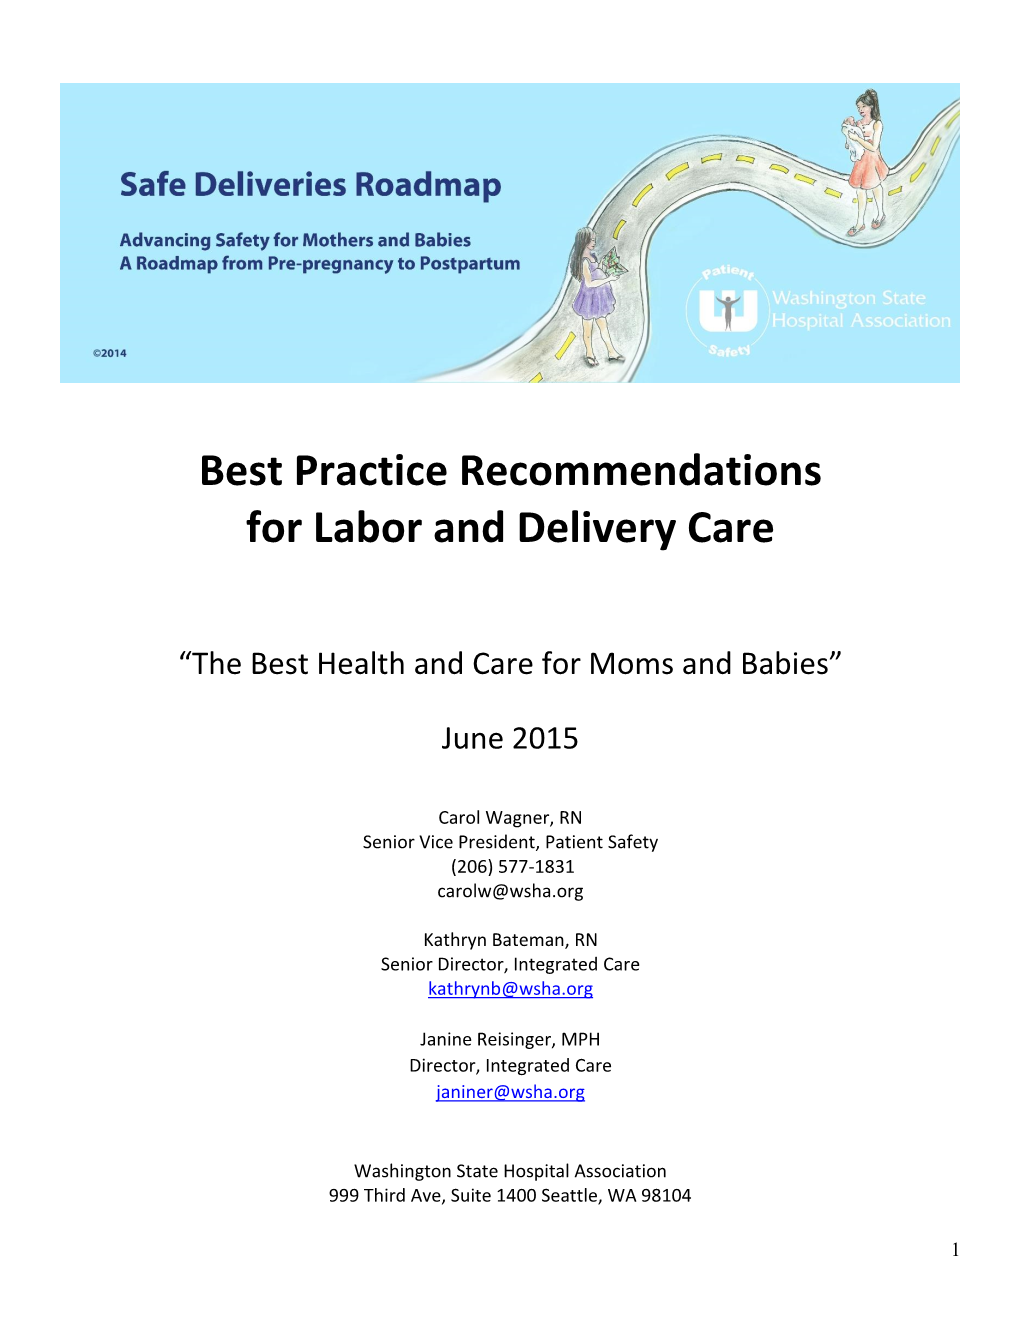 Best Practice Recommendations for Labor and Delivery Care